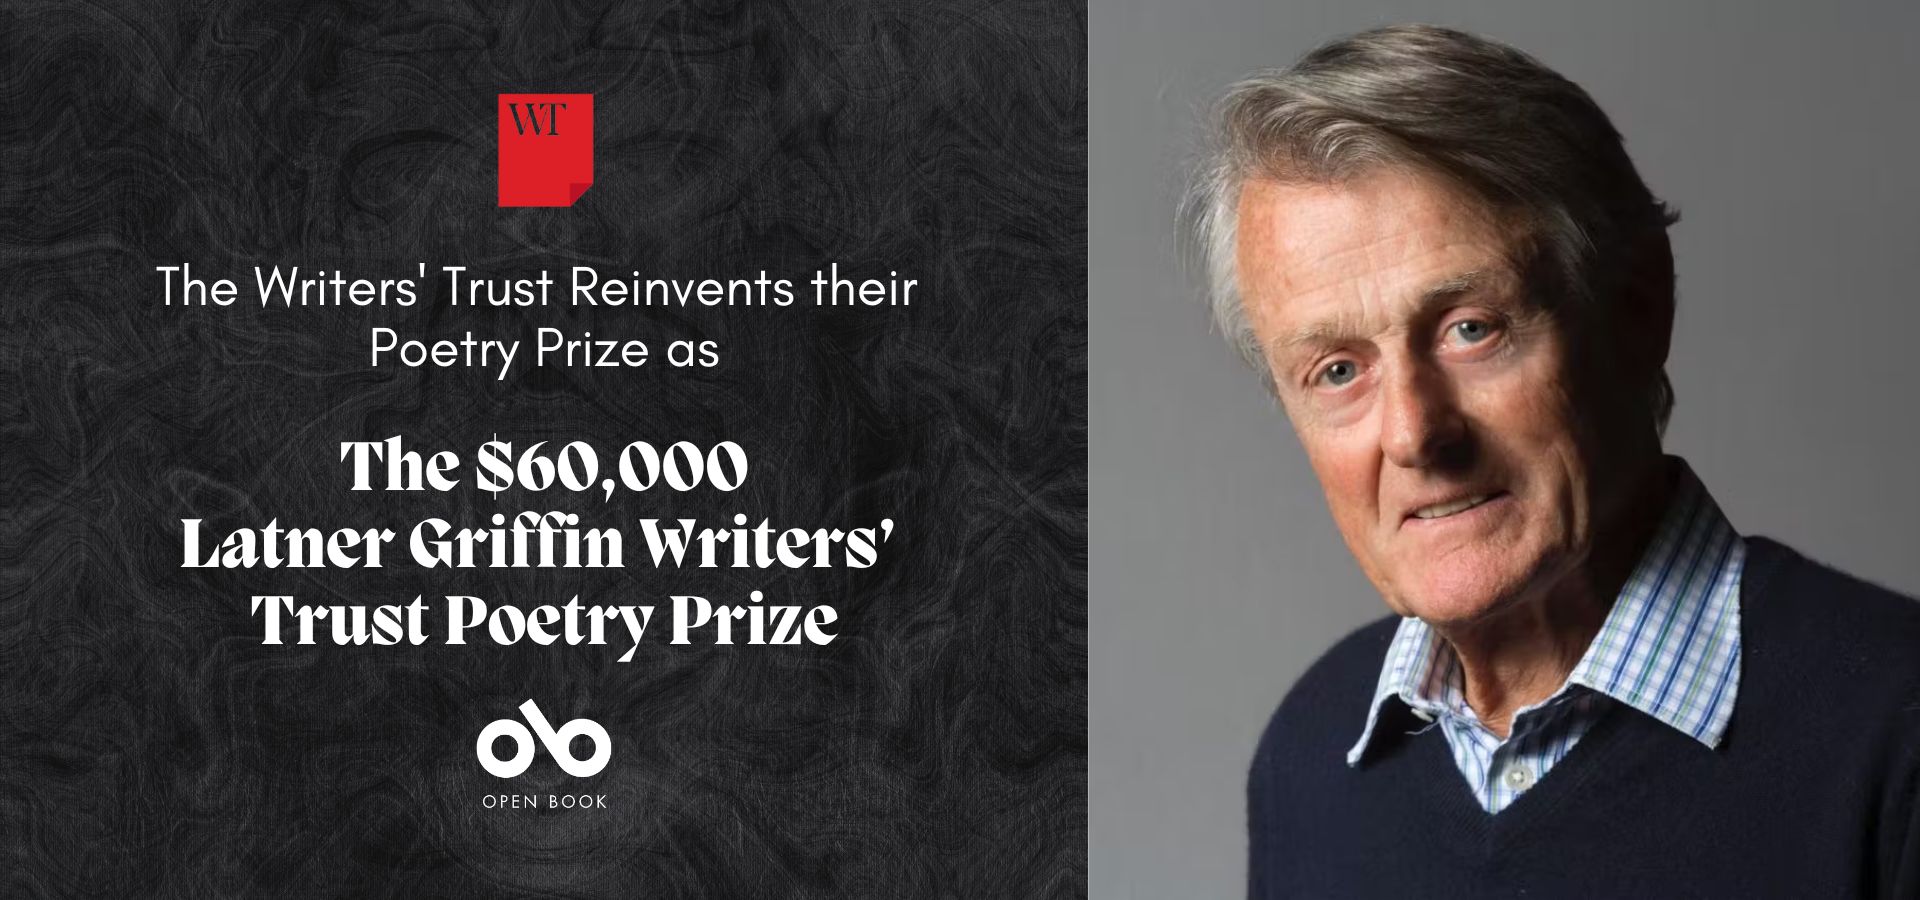 black banner image with a photo of Scott Griffin on the right and text on the left reading "The Writers' Trust Reinvents their  Poetry Prize as The $60,000 Latner Griffin Writers’  Trust Poetry Prize"